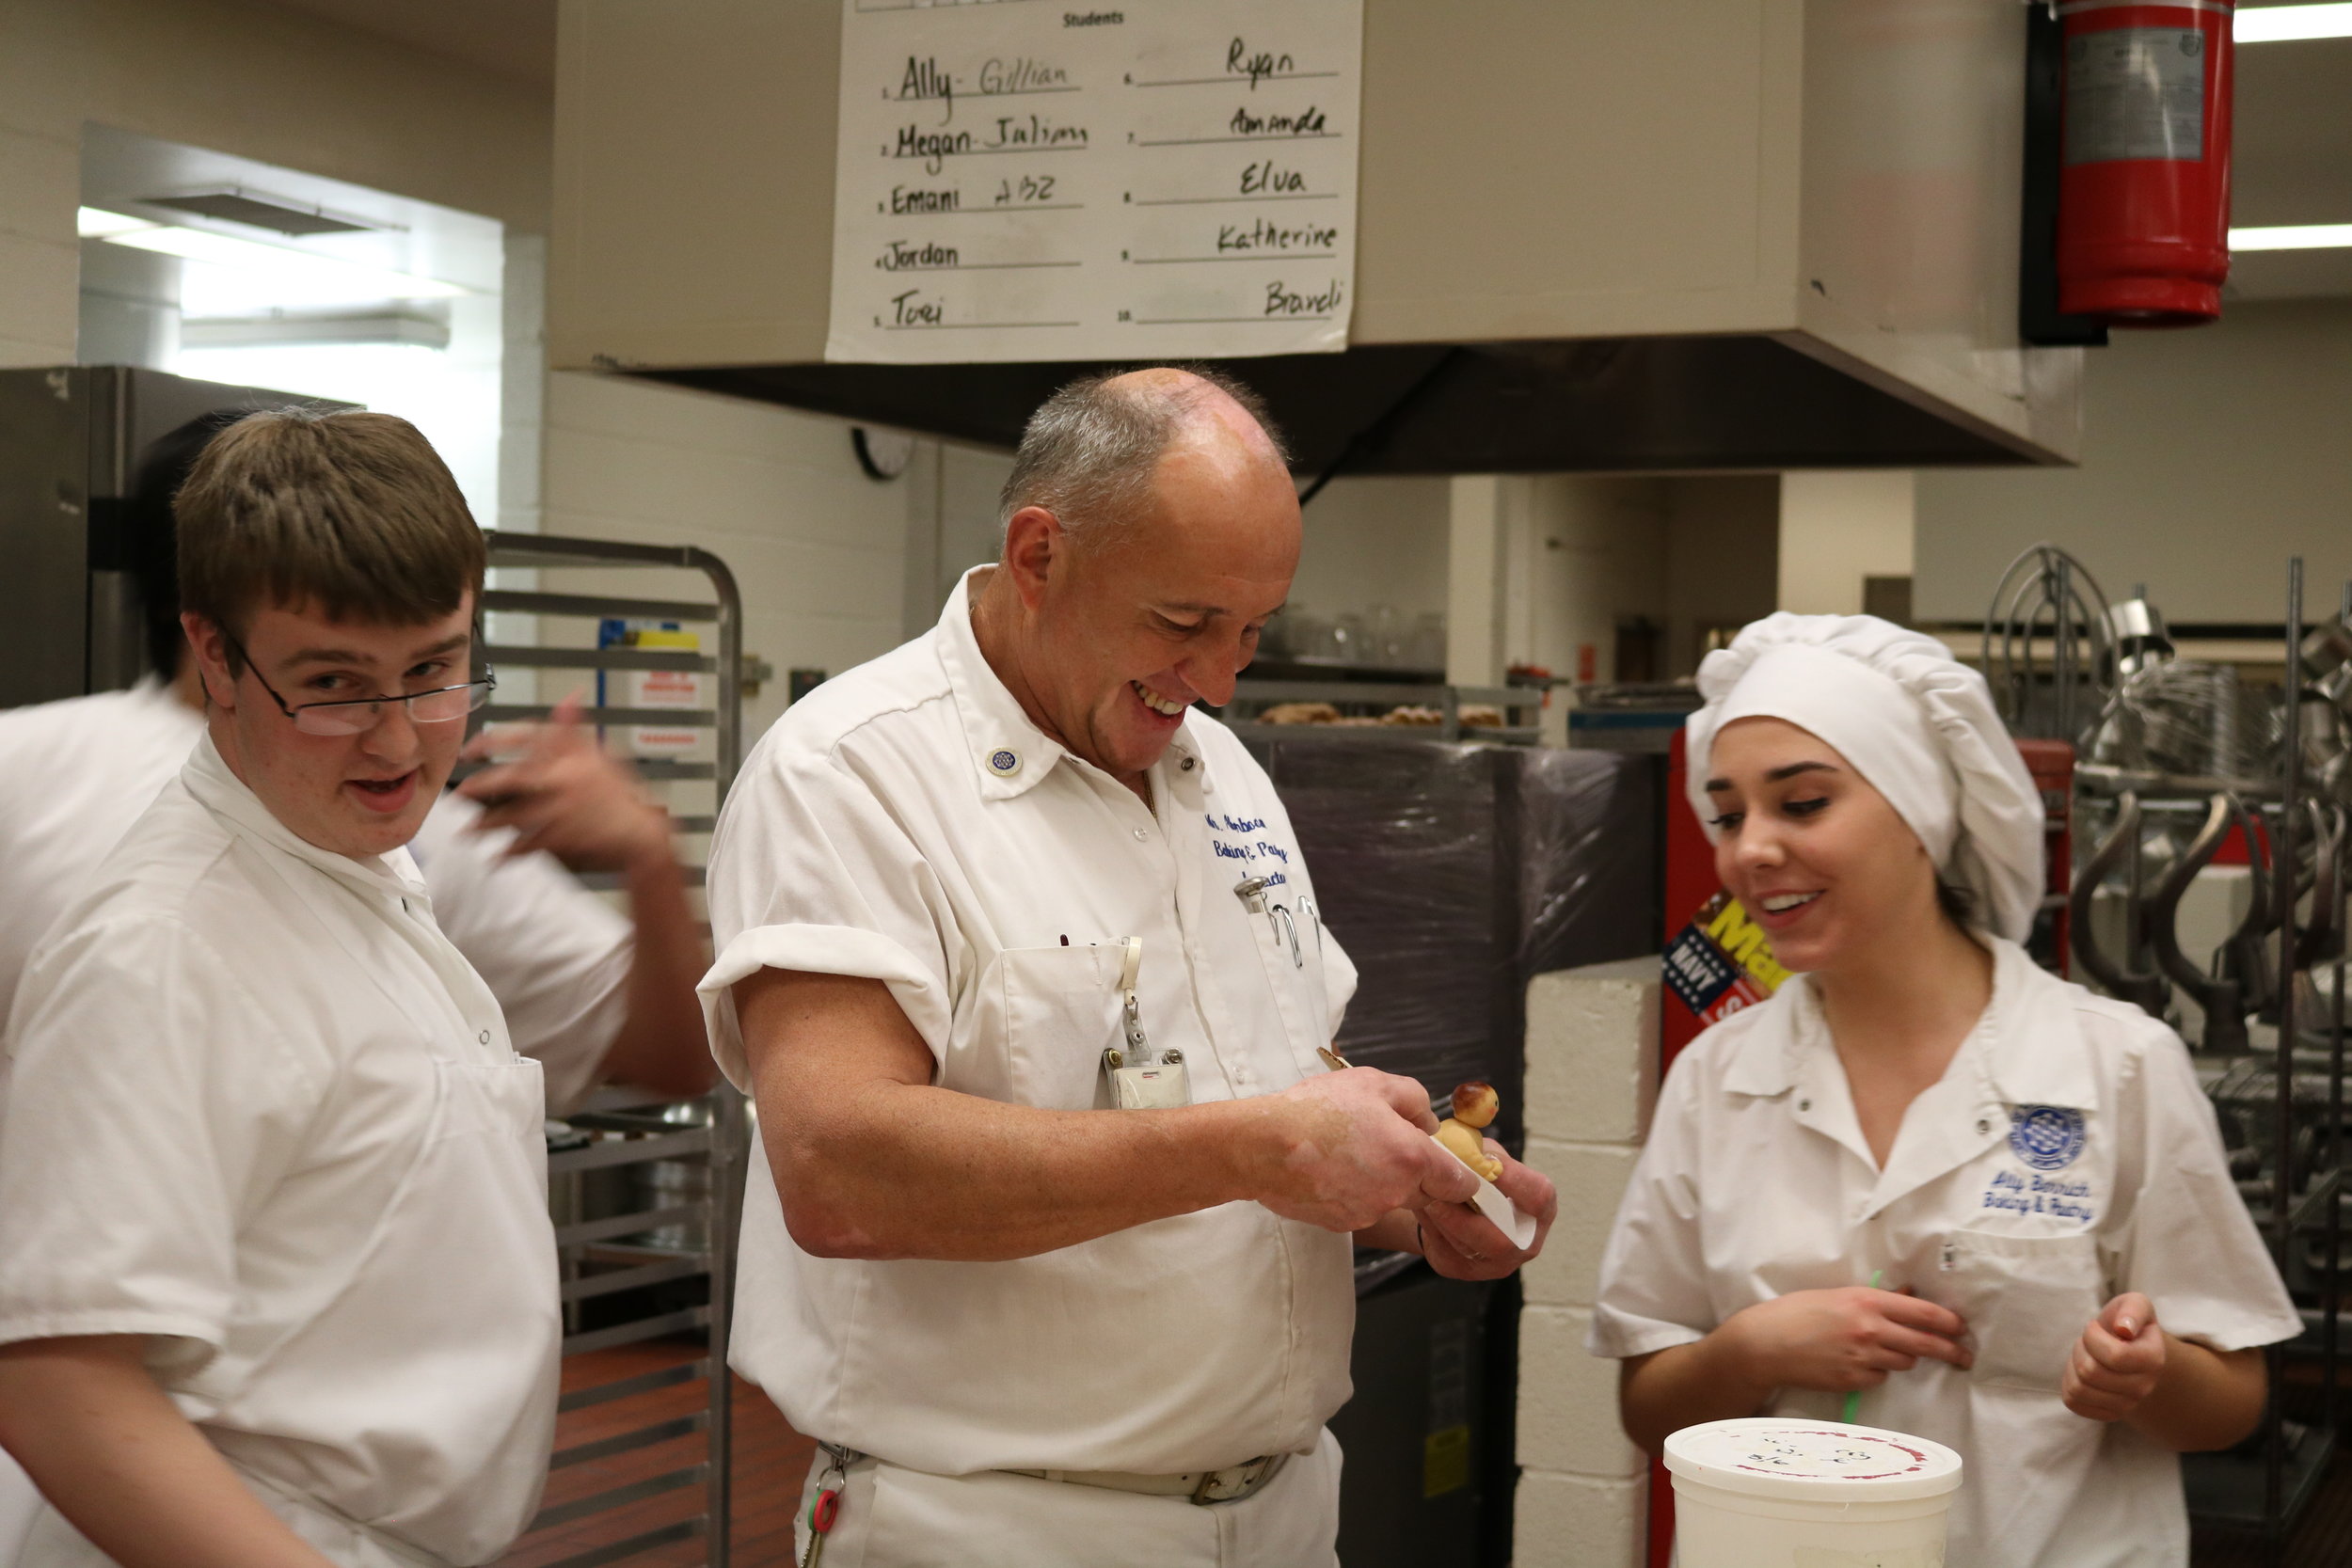   Peter Akerboom, center, makes a marzipan joke with Ally Berrich in a baking and pastry course at the Center of Applied Technology North in Severn, Md., on May 11, 2016  